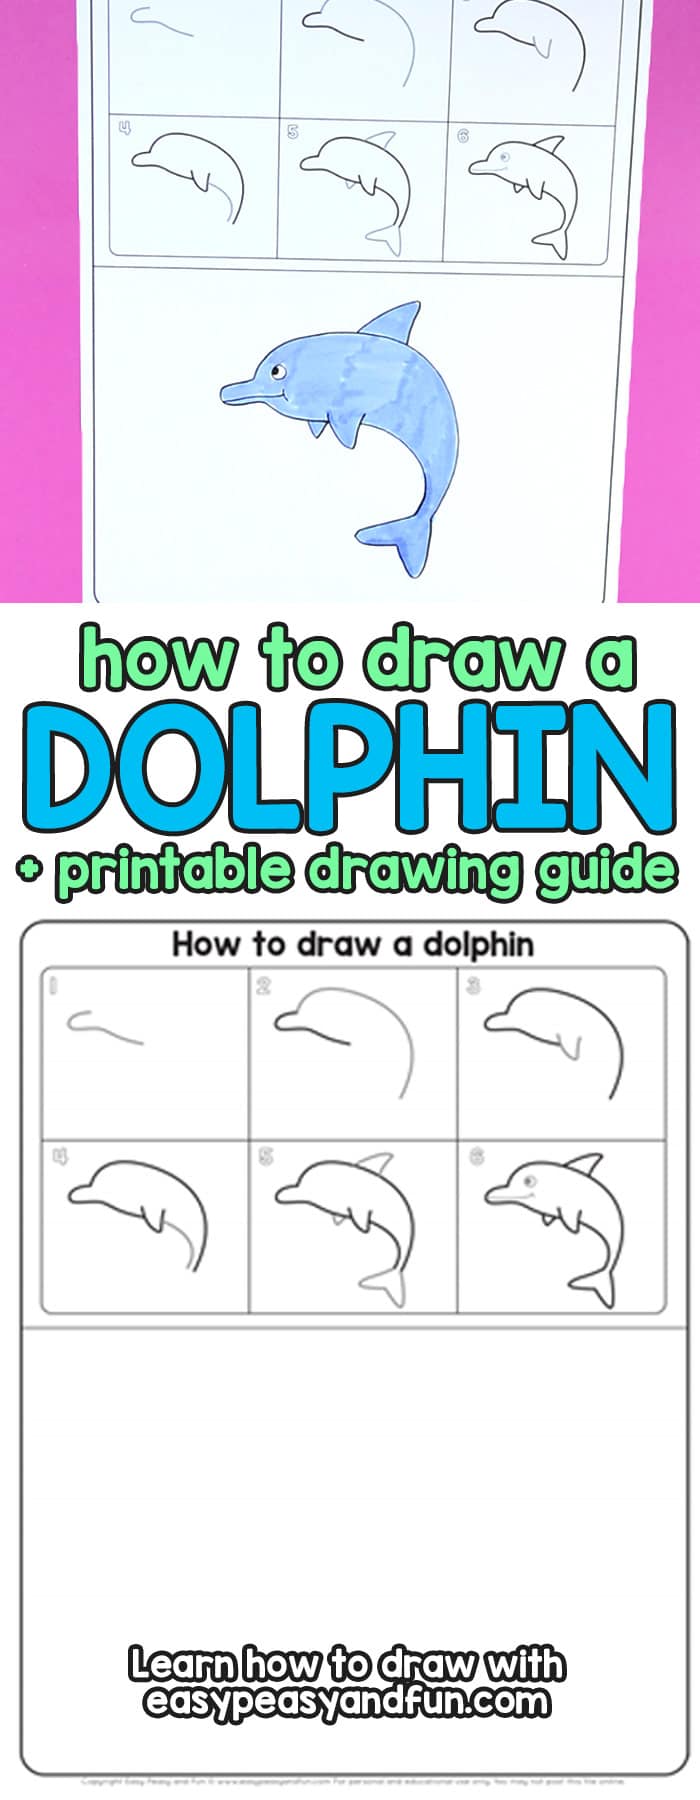 Learn How to Draw a Dolphin in Jumping out of Water Pose - Step by Step Tutorial for Kids